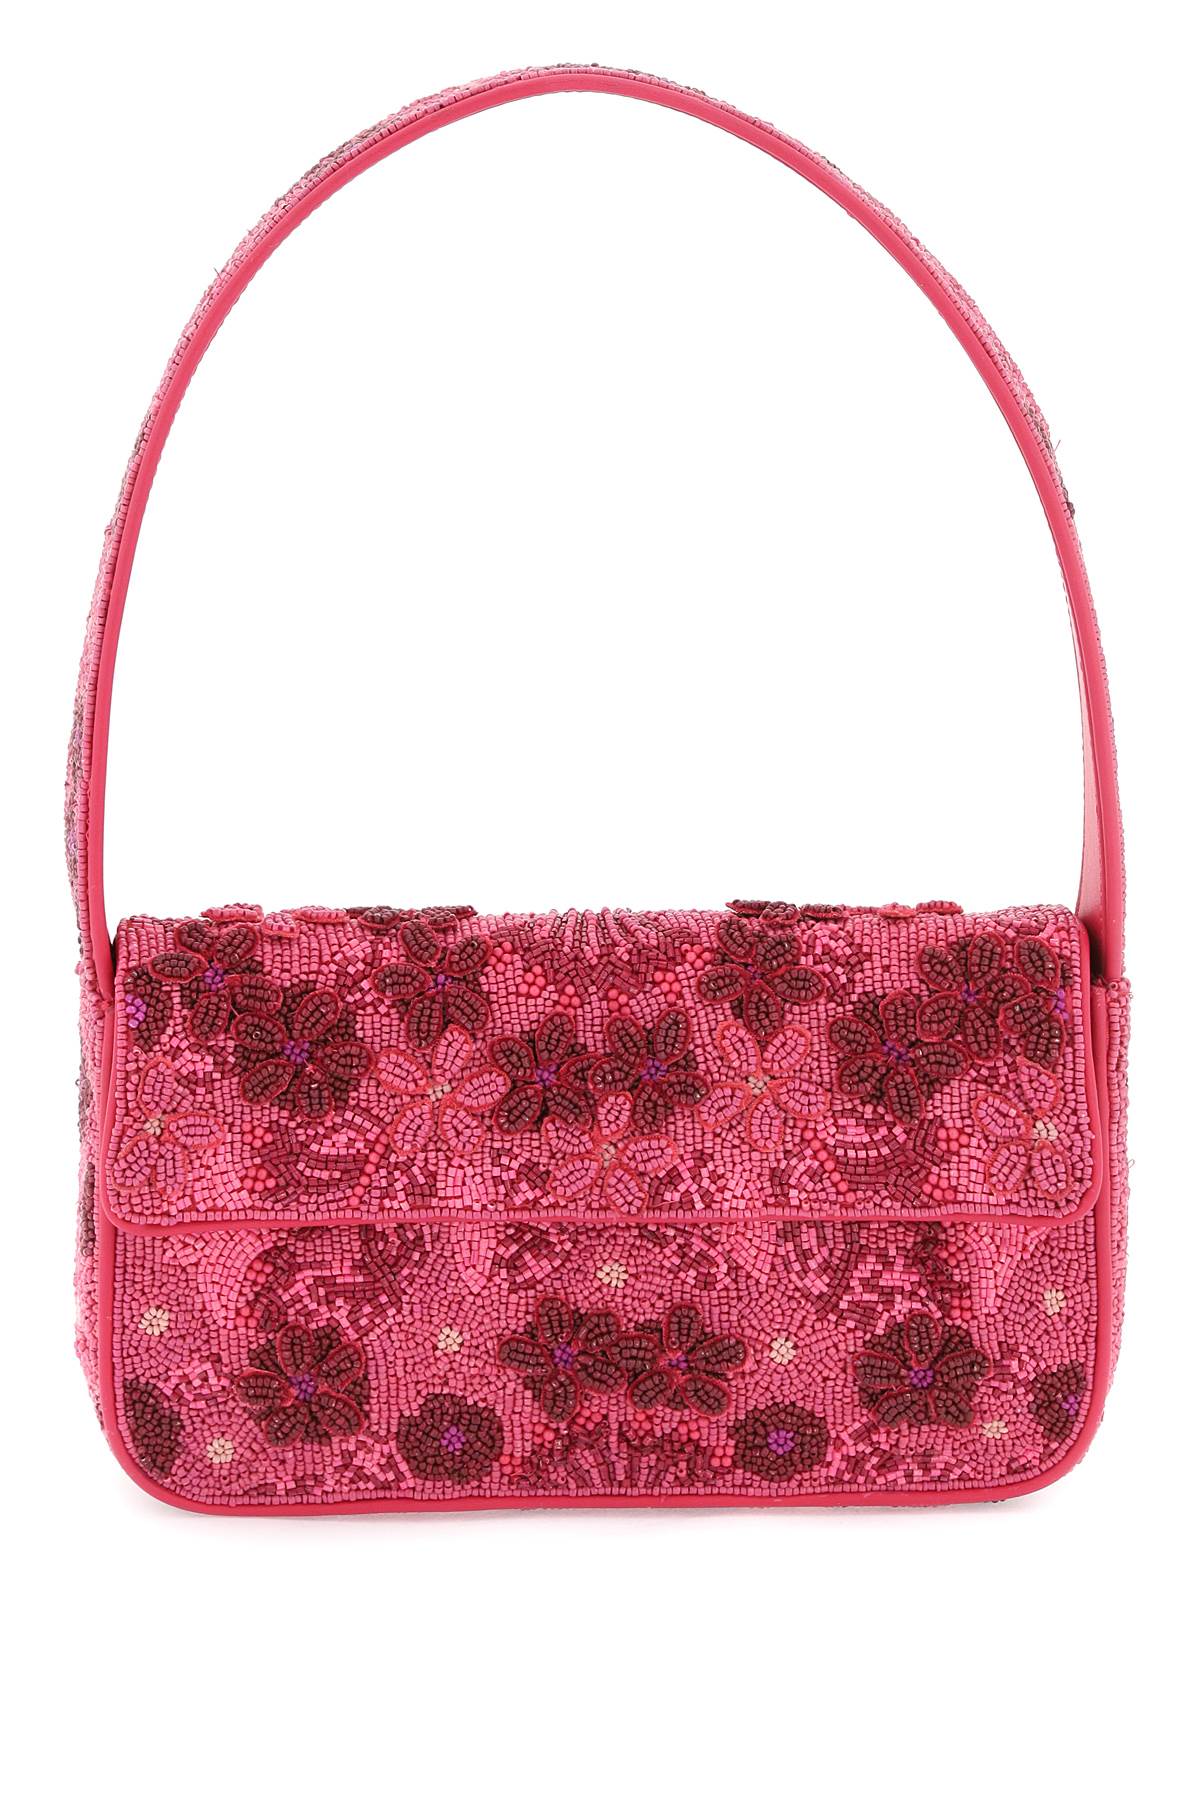 STAUD blossom Garden Party Tommy Beaded Shoulder Bag